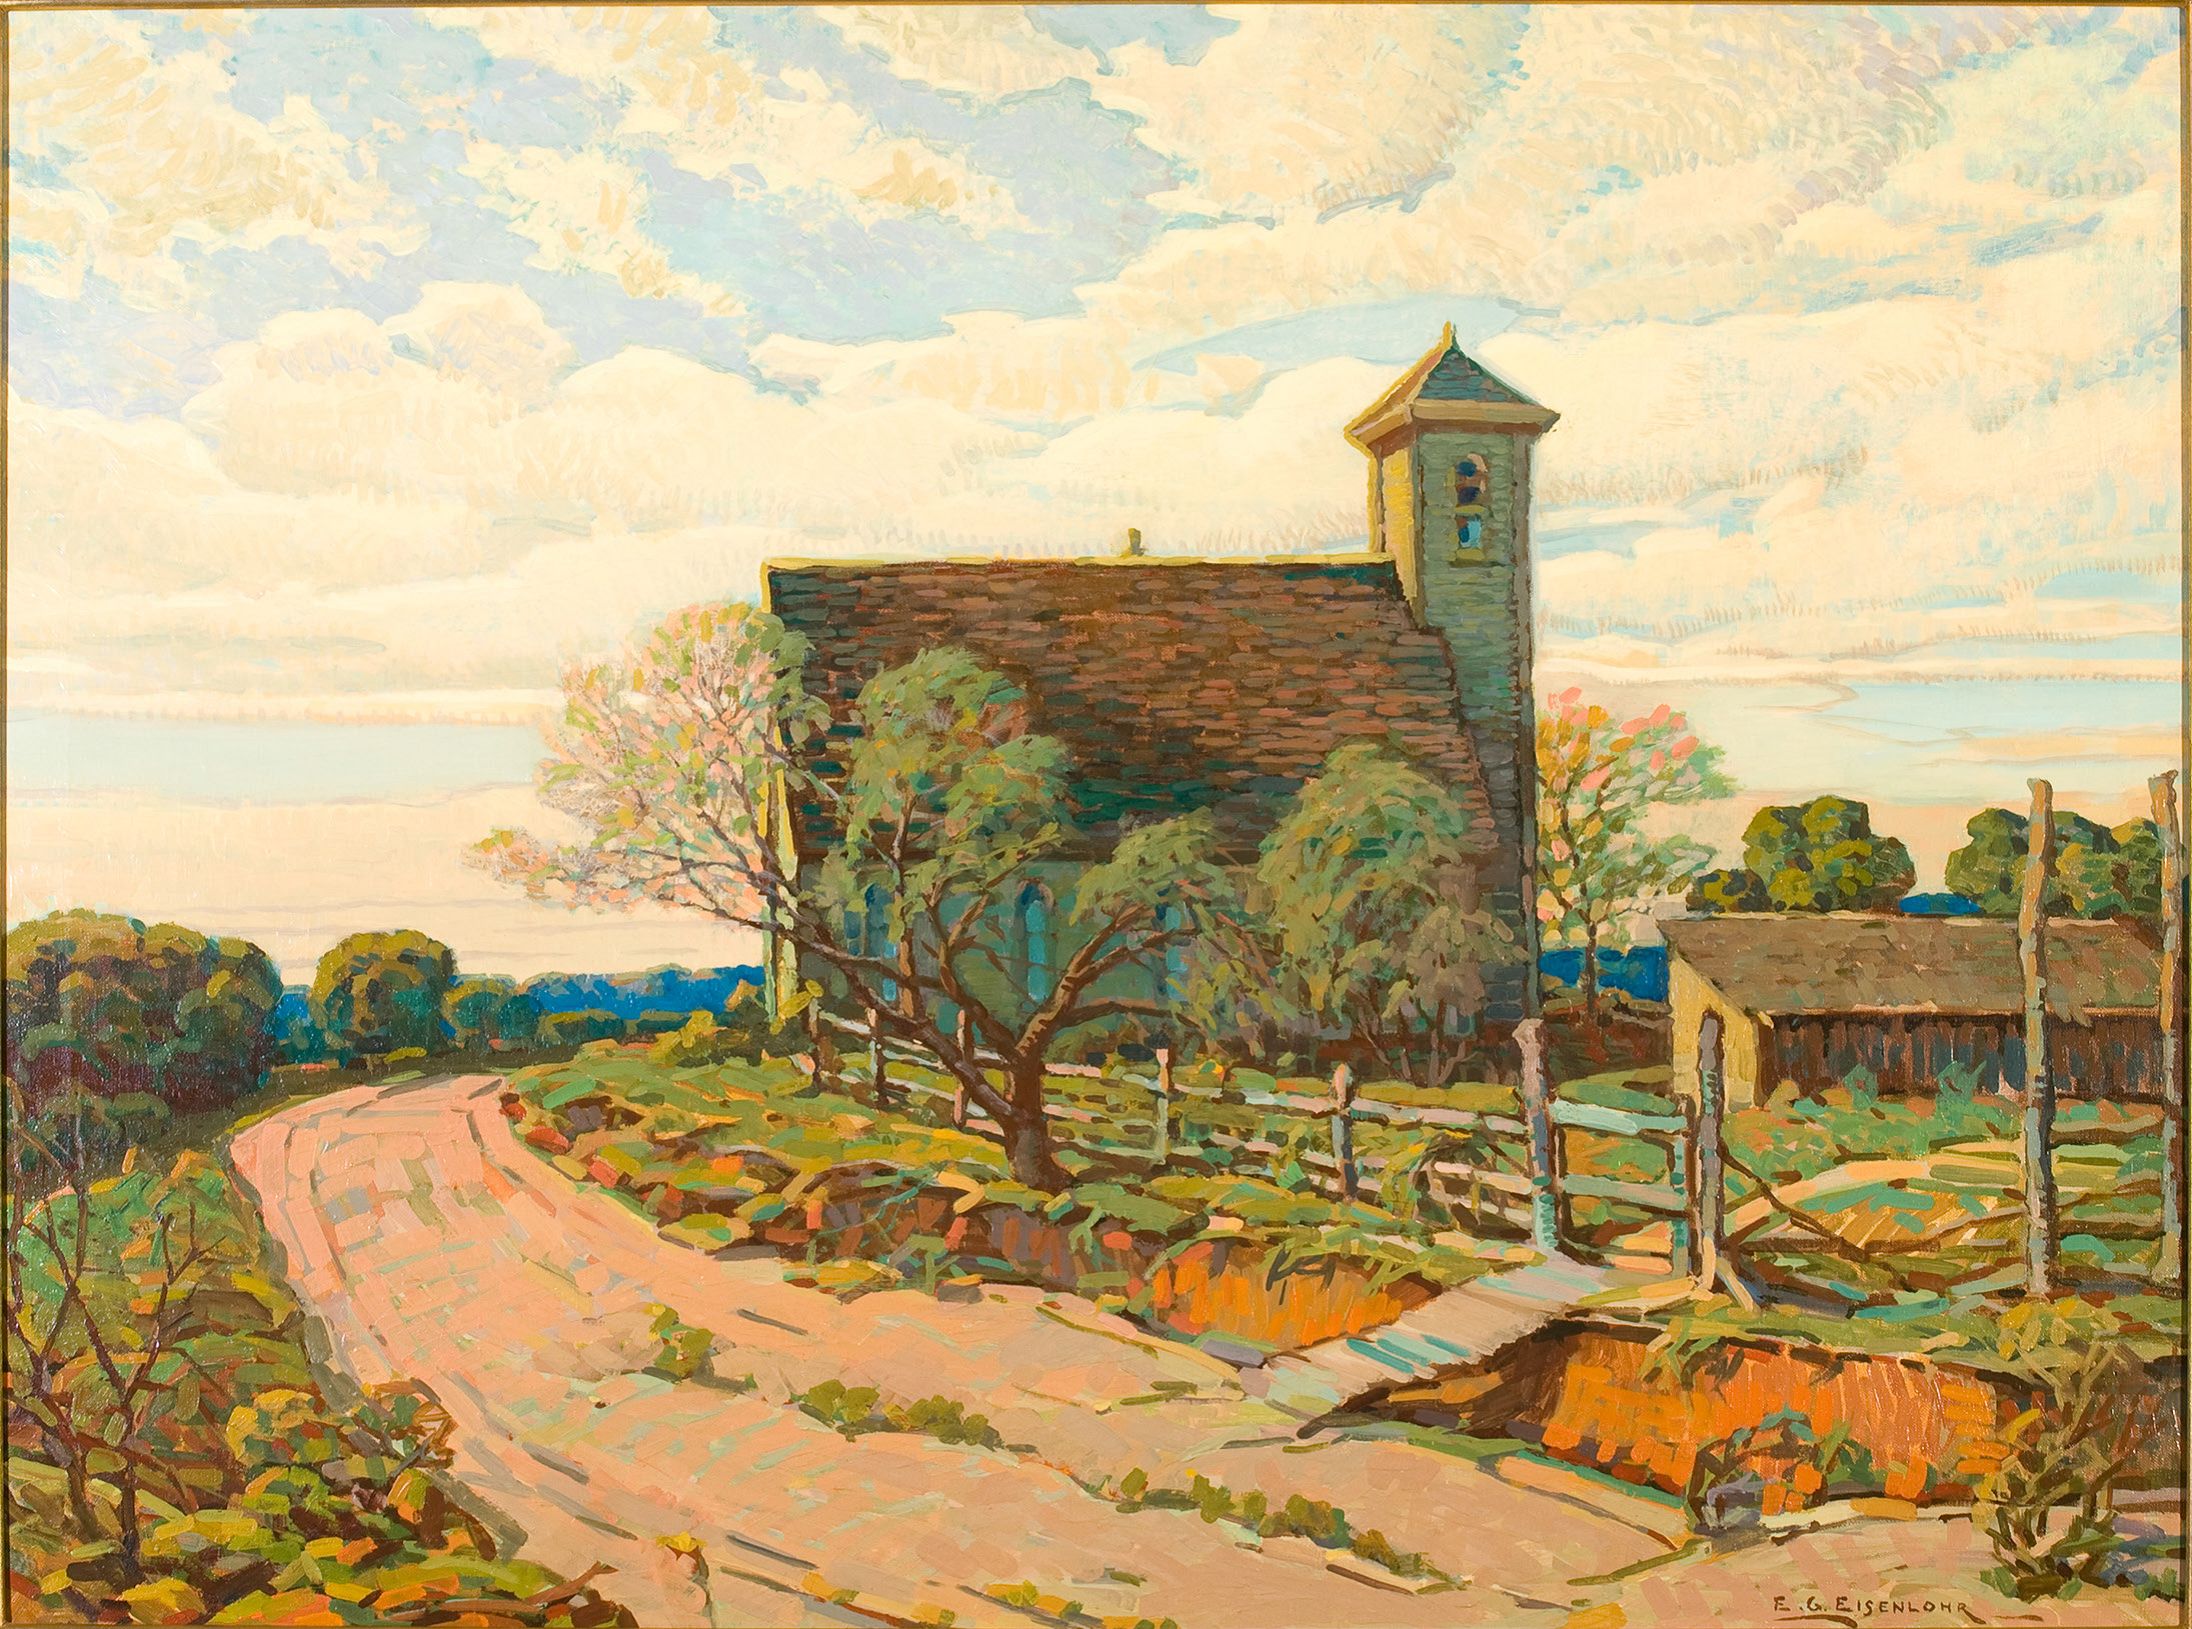 Painting of a church in a country landscape.